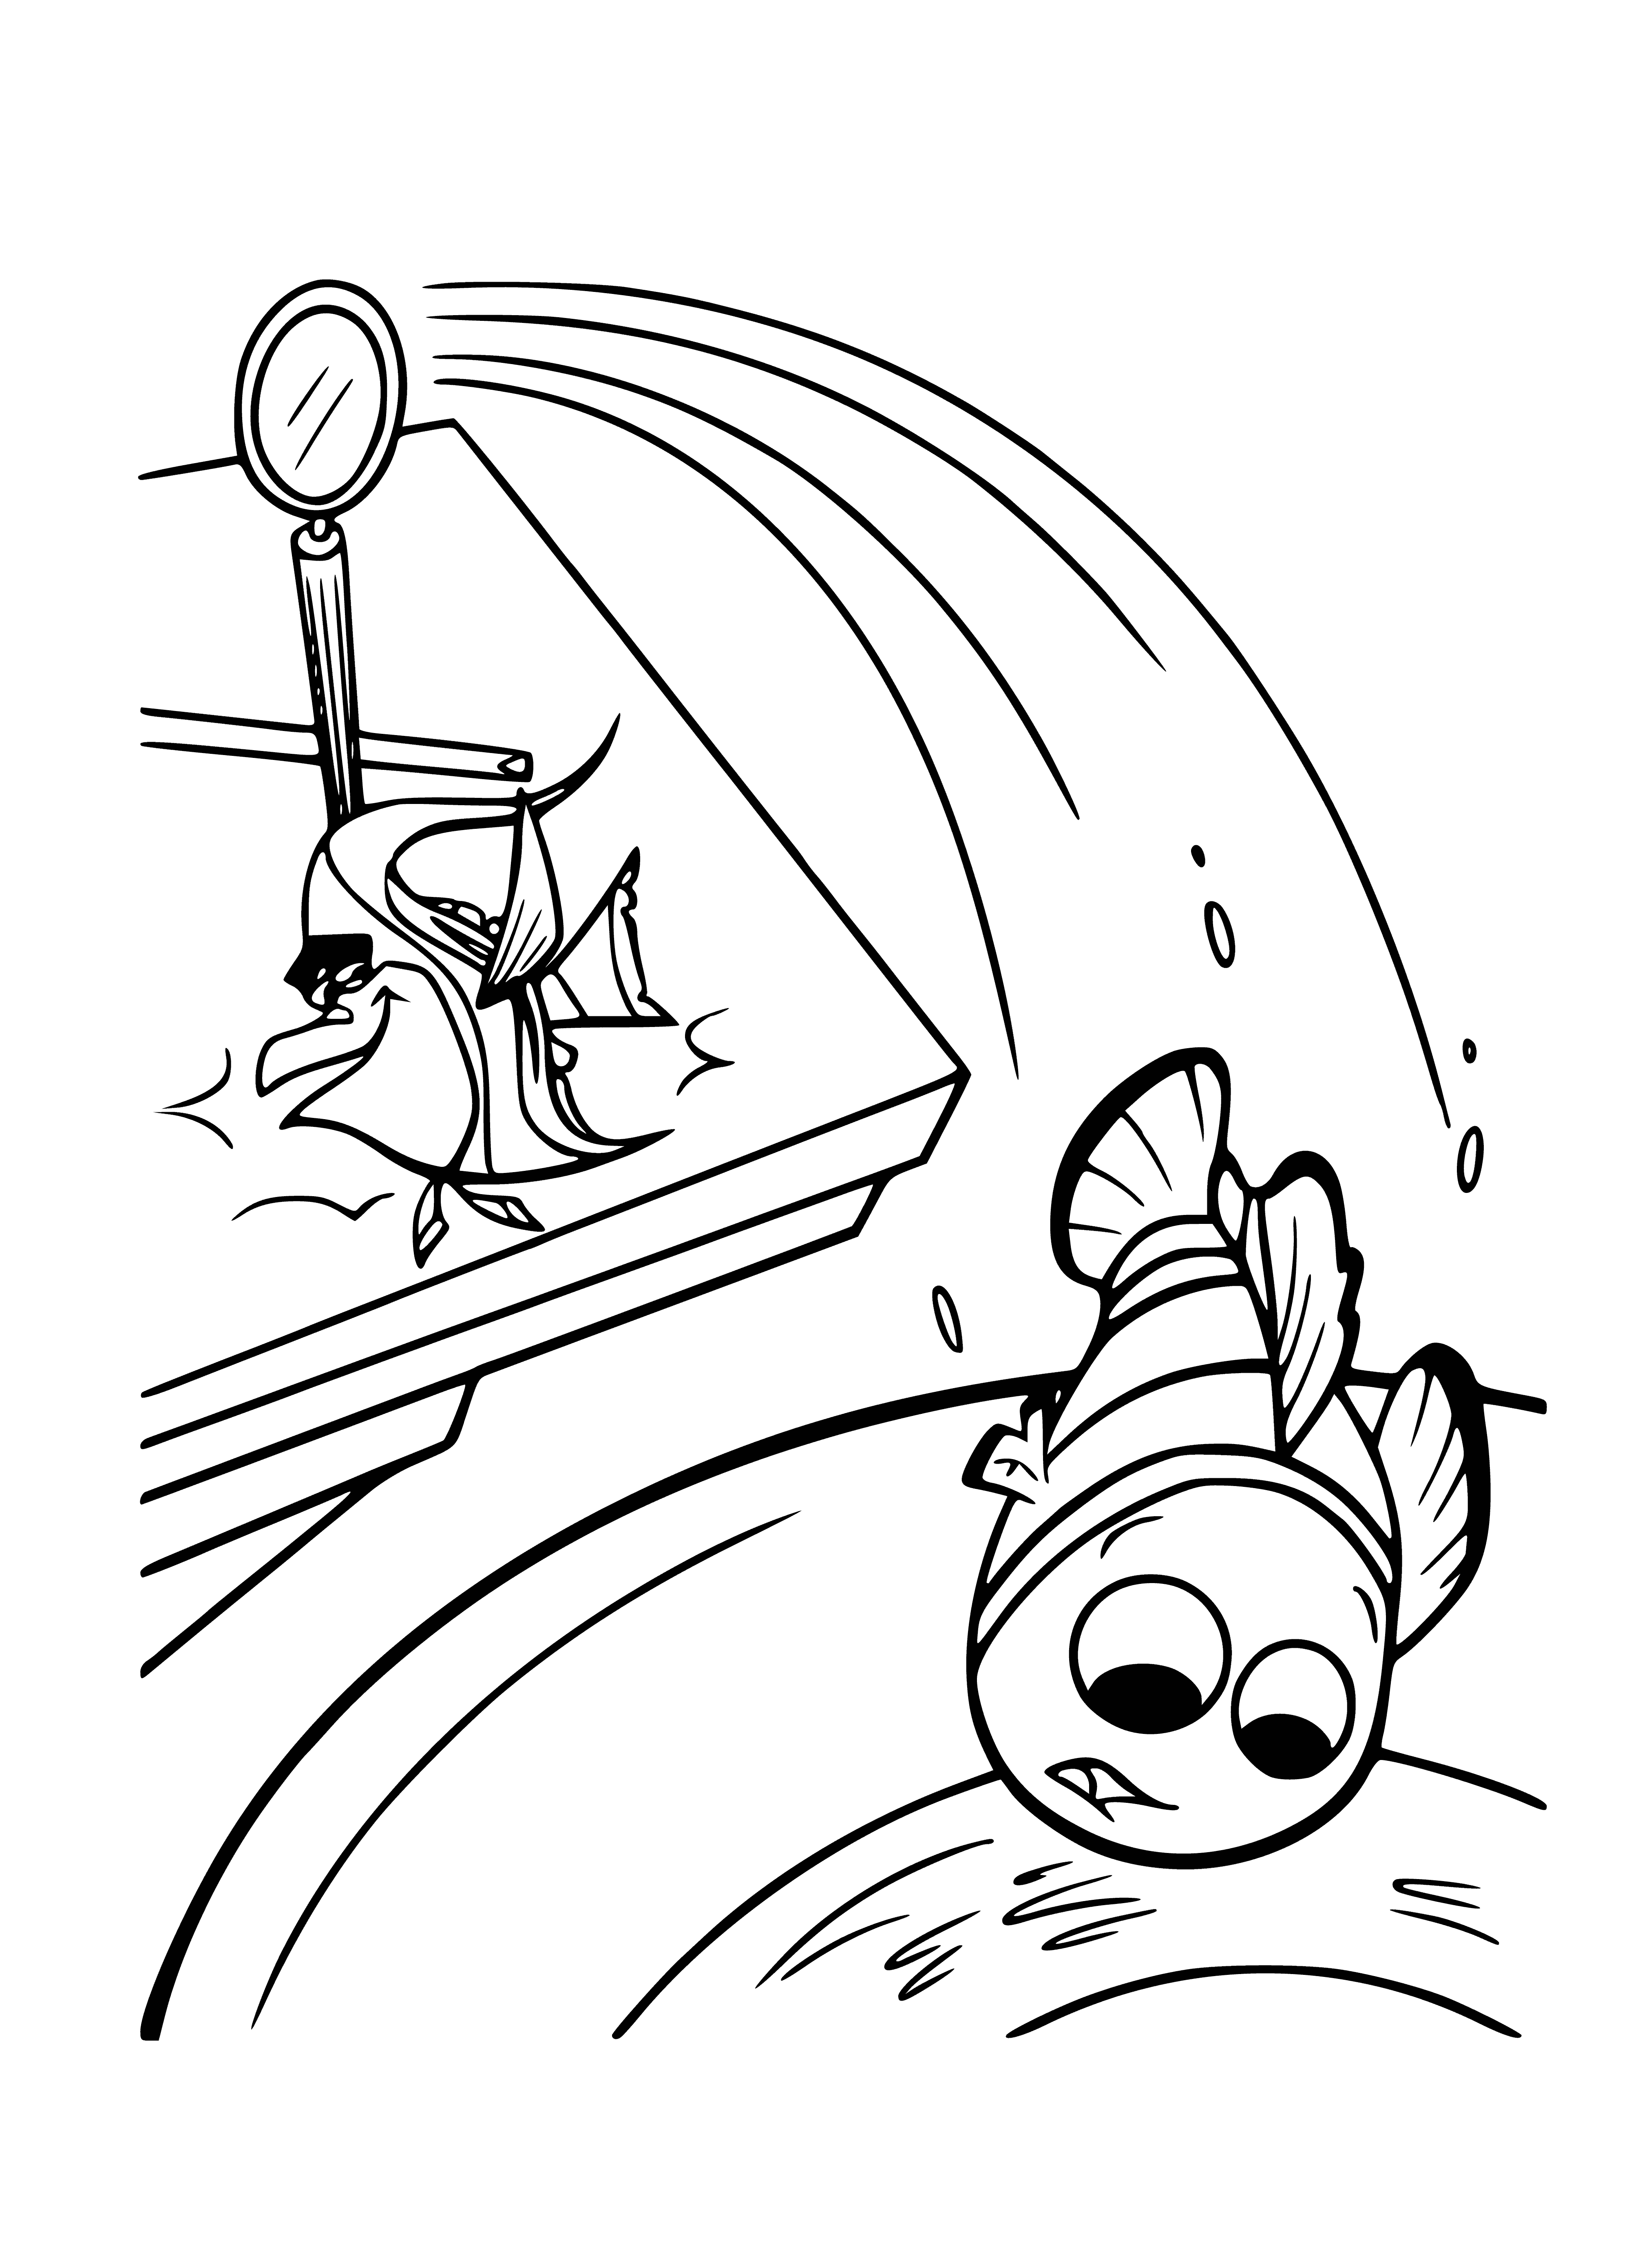 Down the drain coloring page